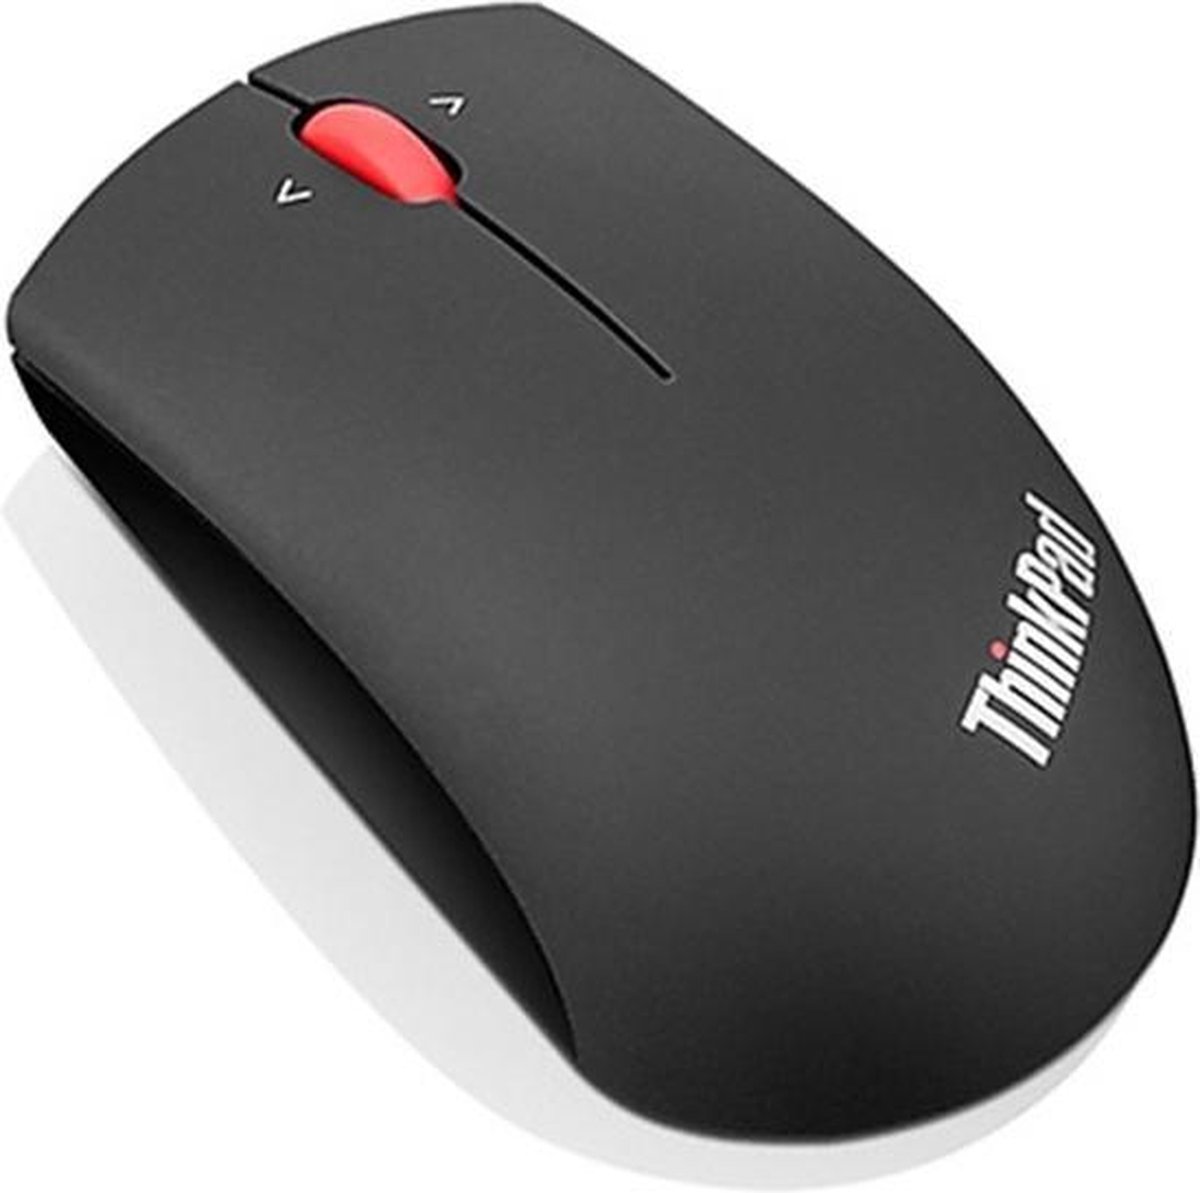 Lenovo ThinkPad Office Blue-ray Wireless Frosted Mouse (zwart) - Merkloos